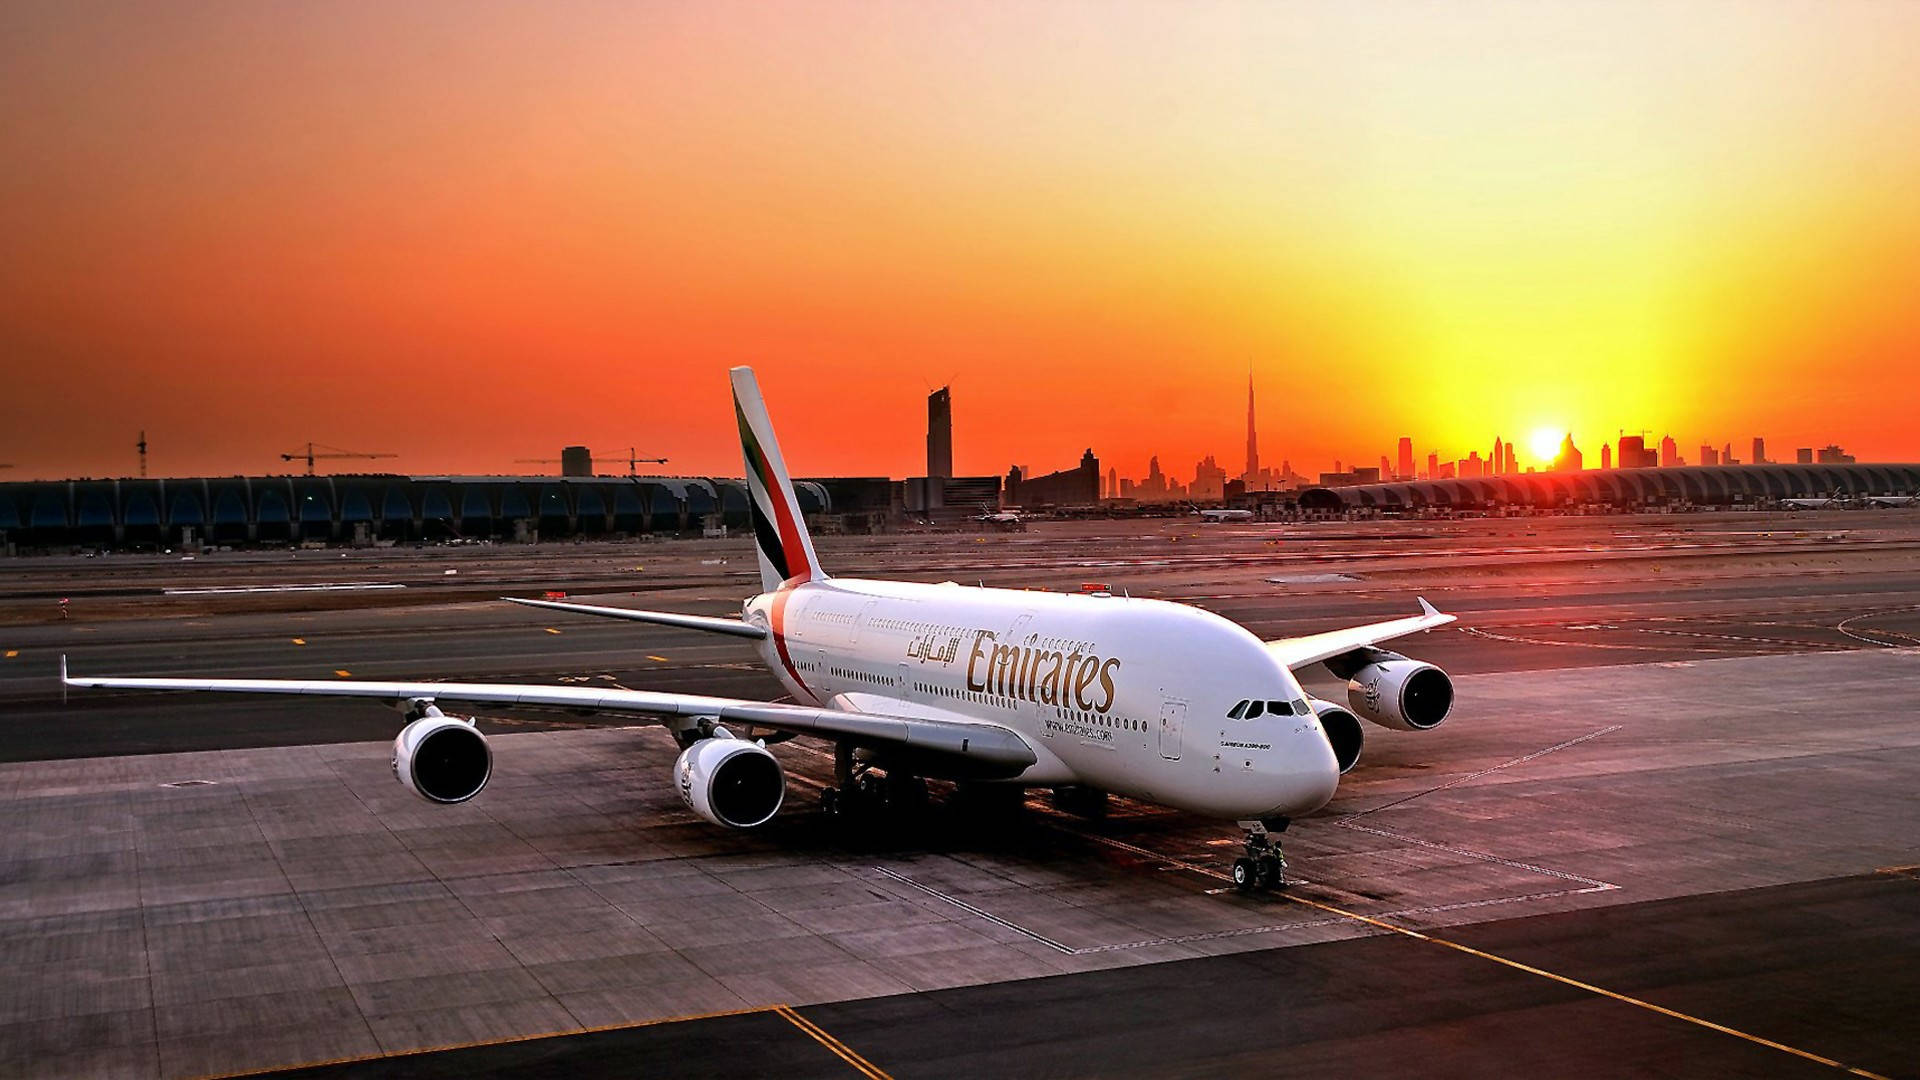 Emirates Airplane At The Airport